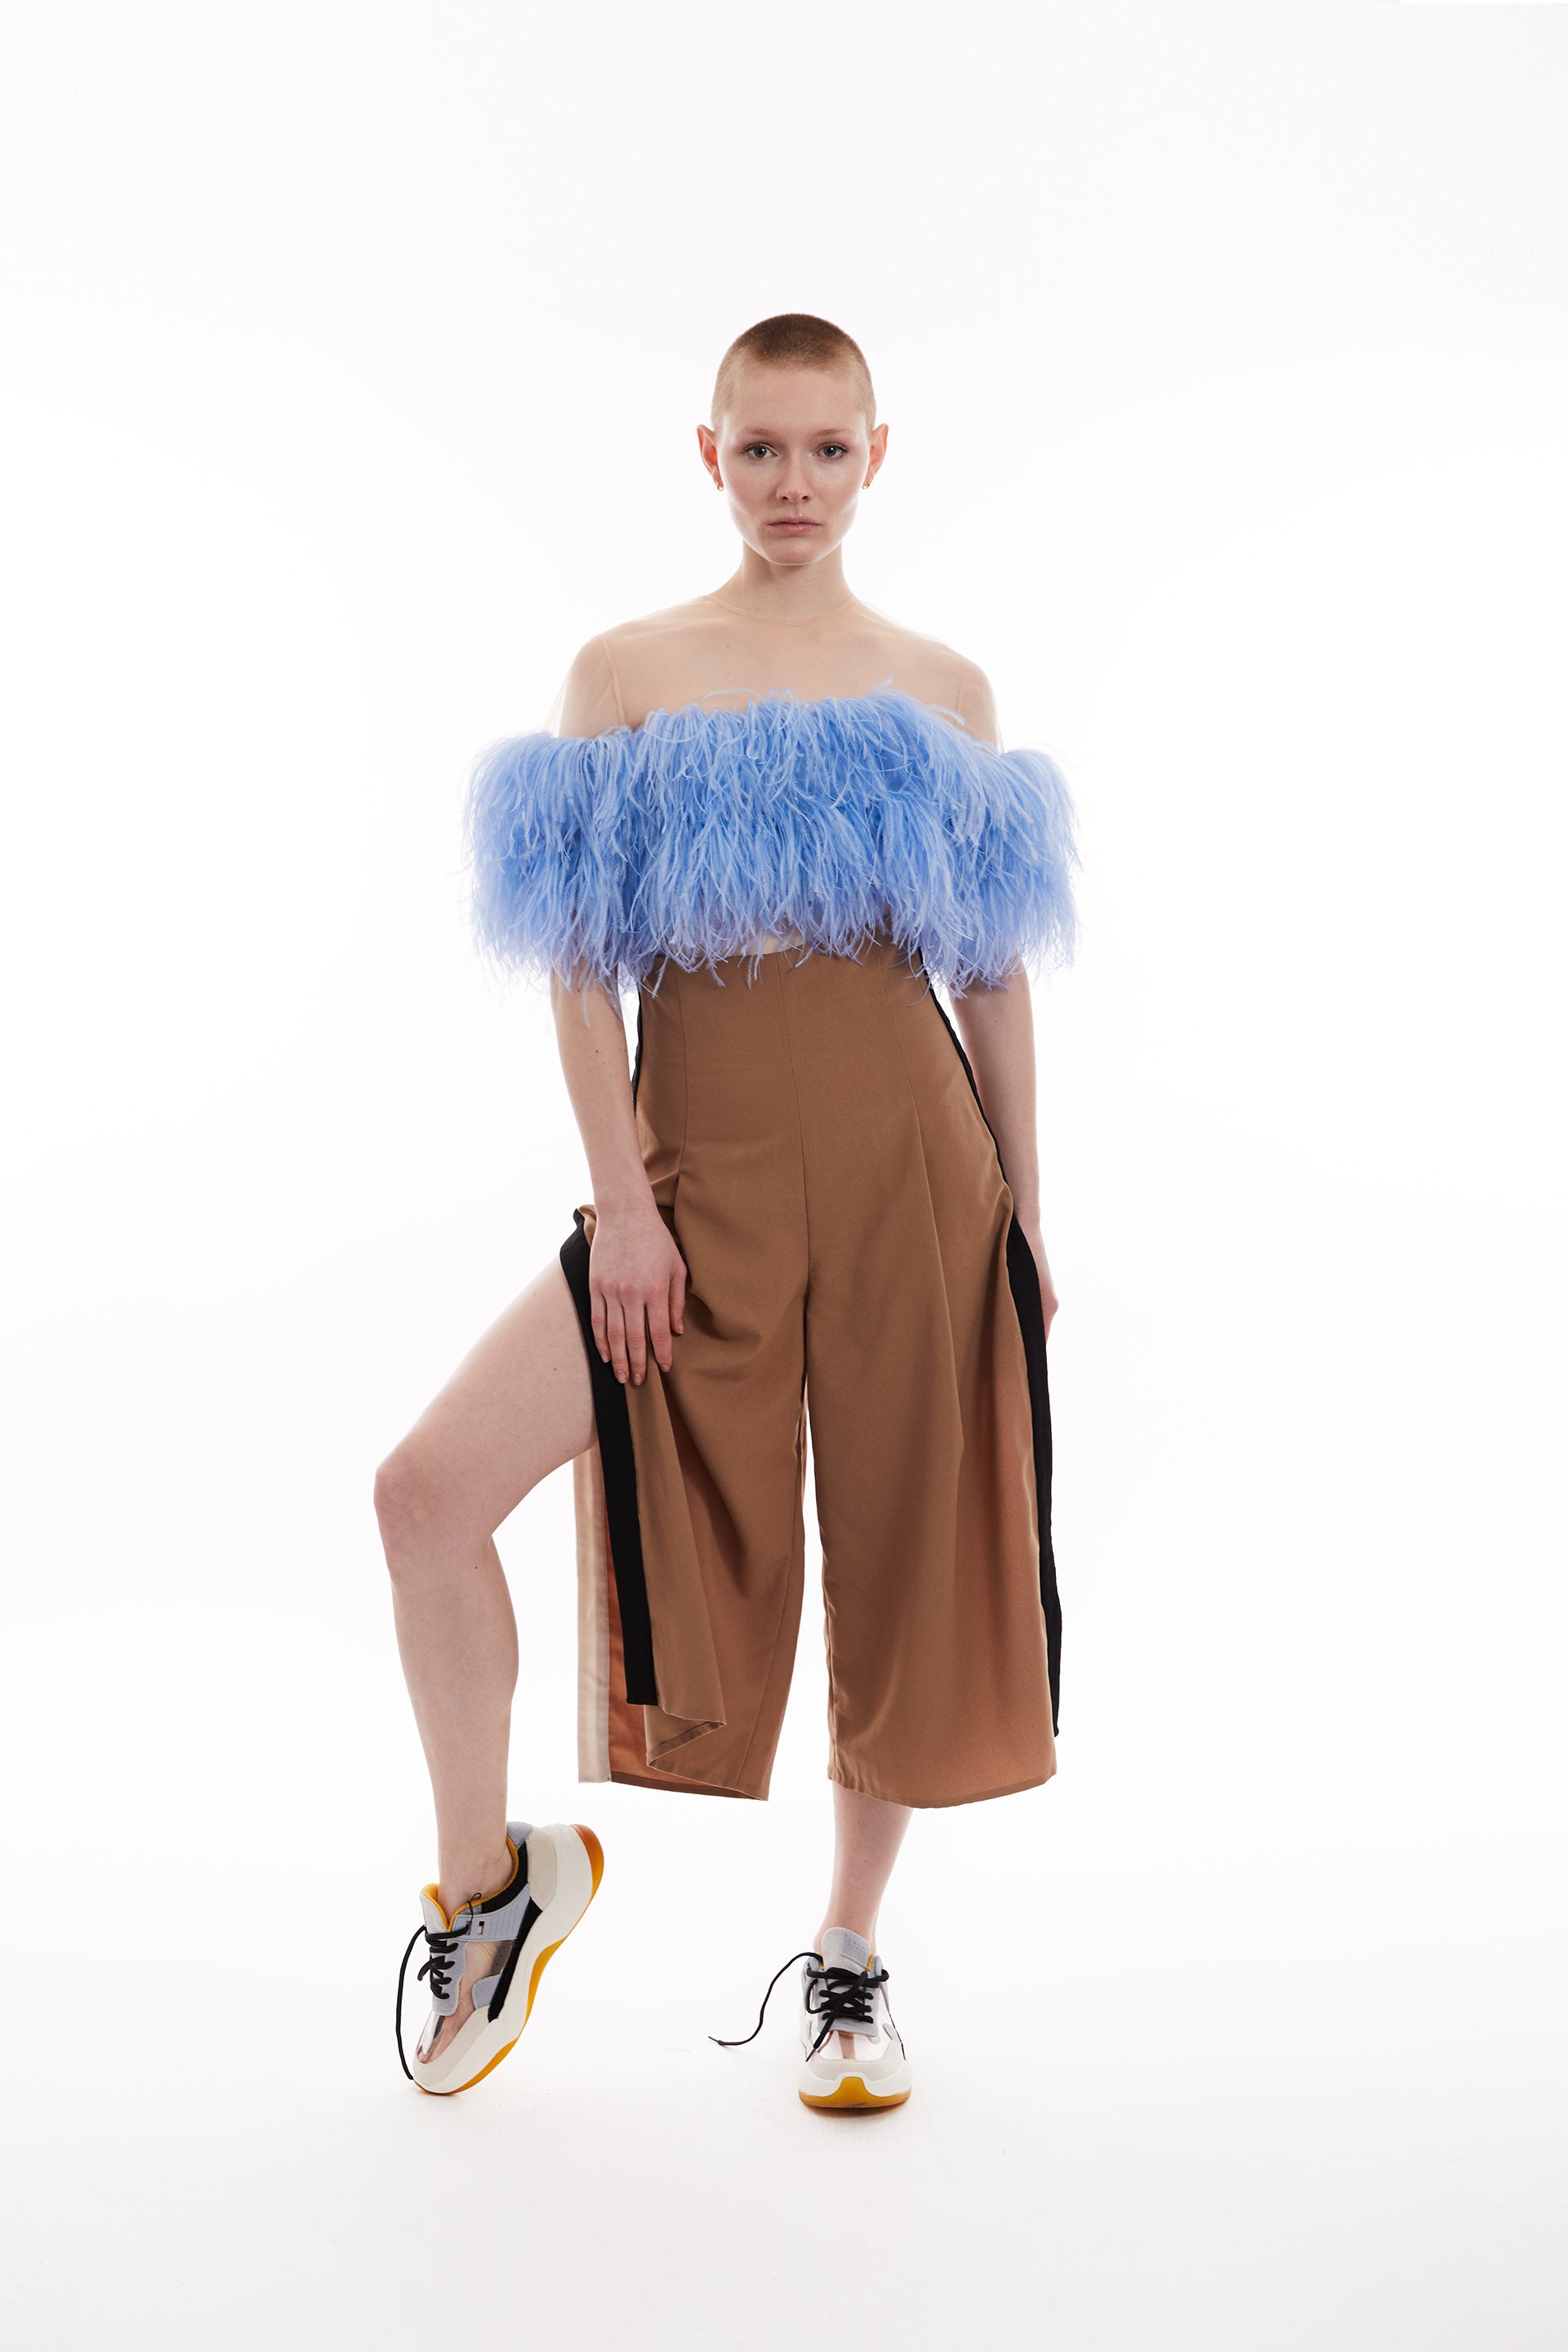 Cropped feather-trimmed tulle top